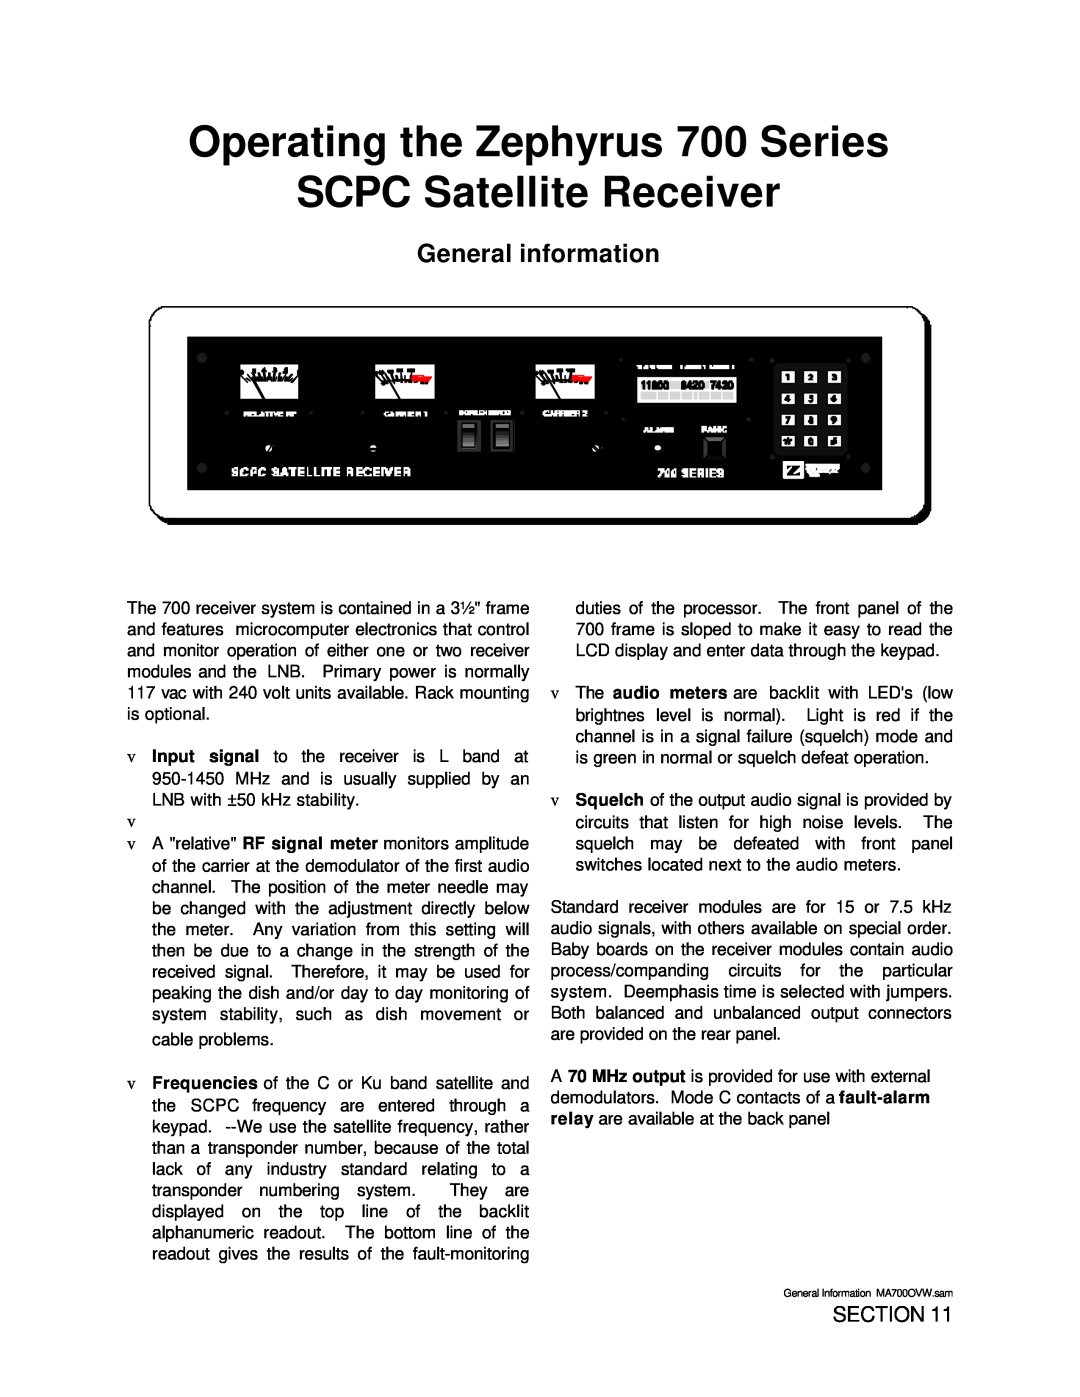 Zephyr manual General information, Operating the Zephyrus 700 Series, SCPC Satellite Receiver 